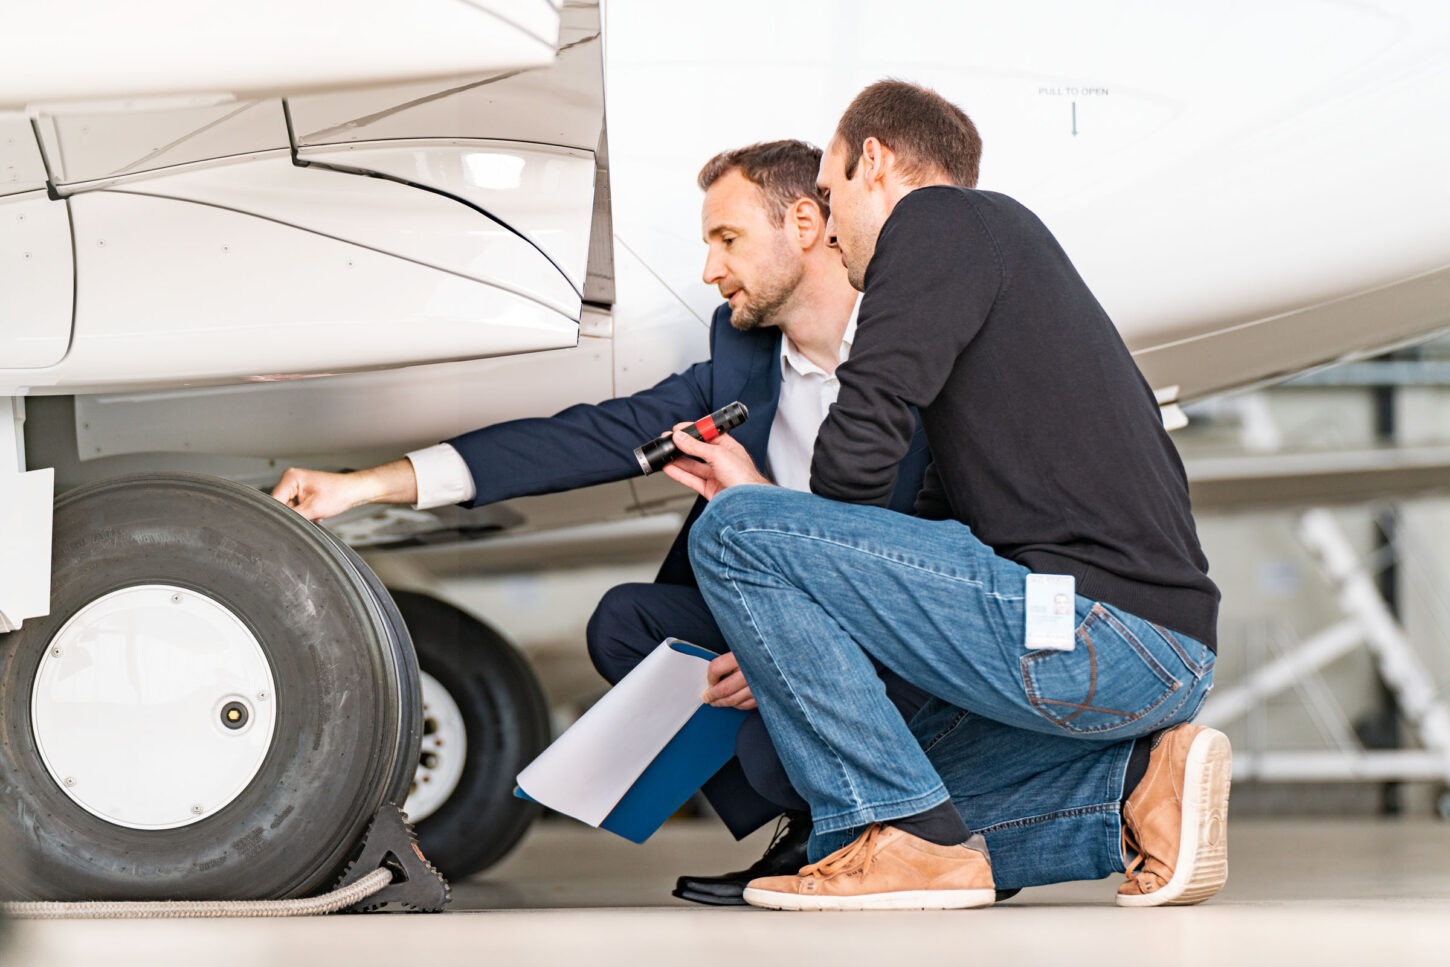 two aircraft specialists doing safety checks on the wheels of a parked aircraft